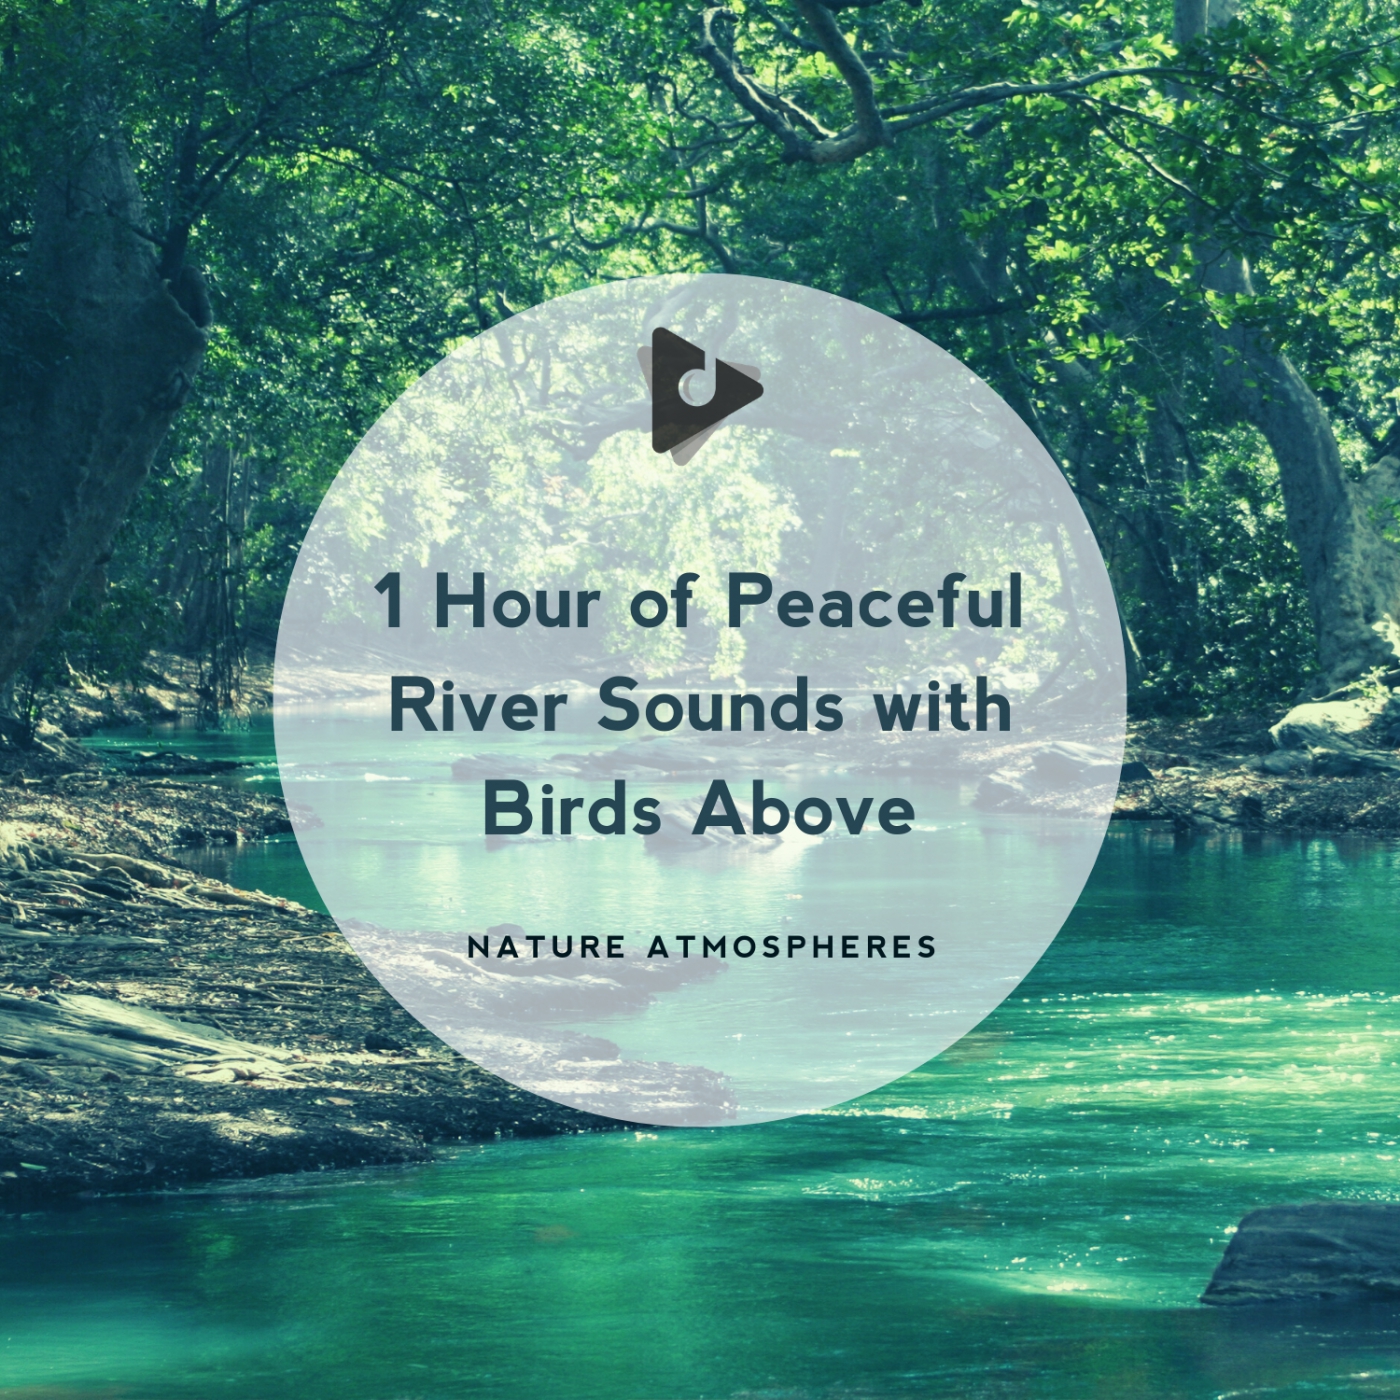 1 Hour of Peaceful River Sounds with Birds Above